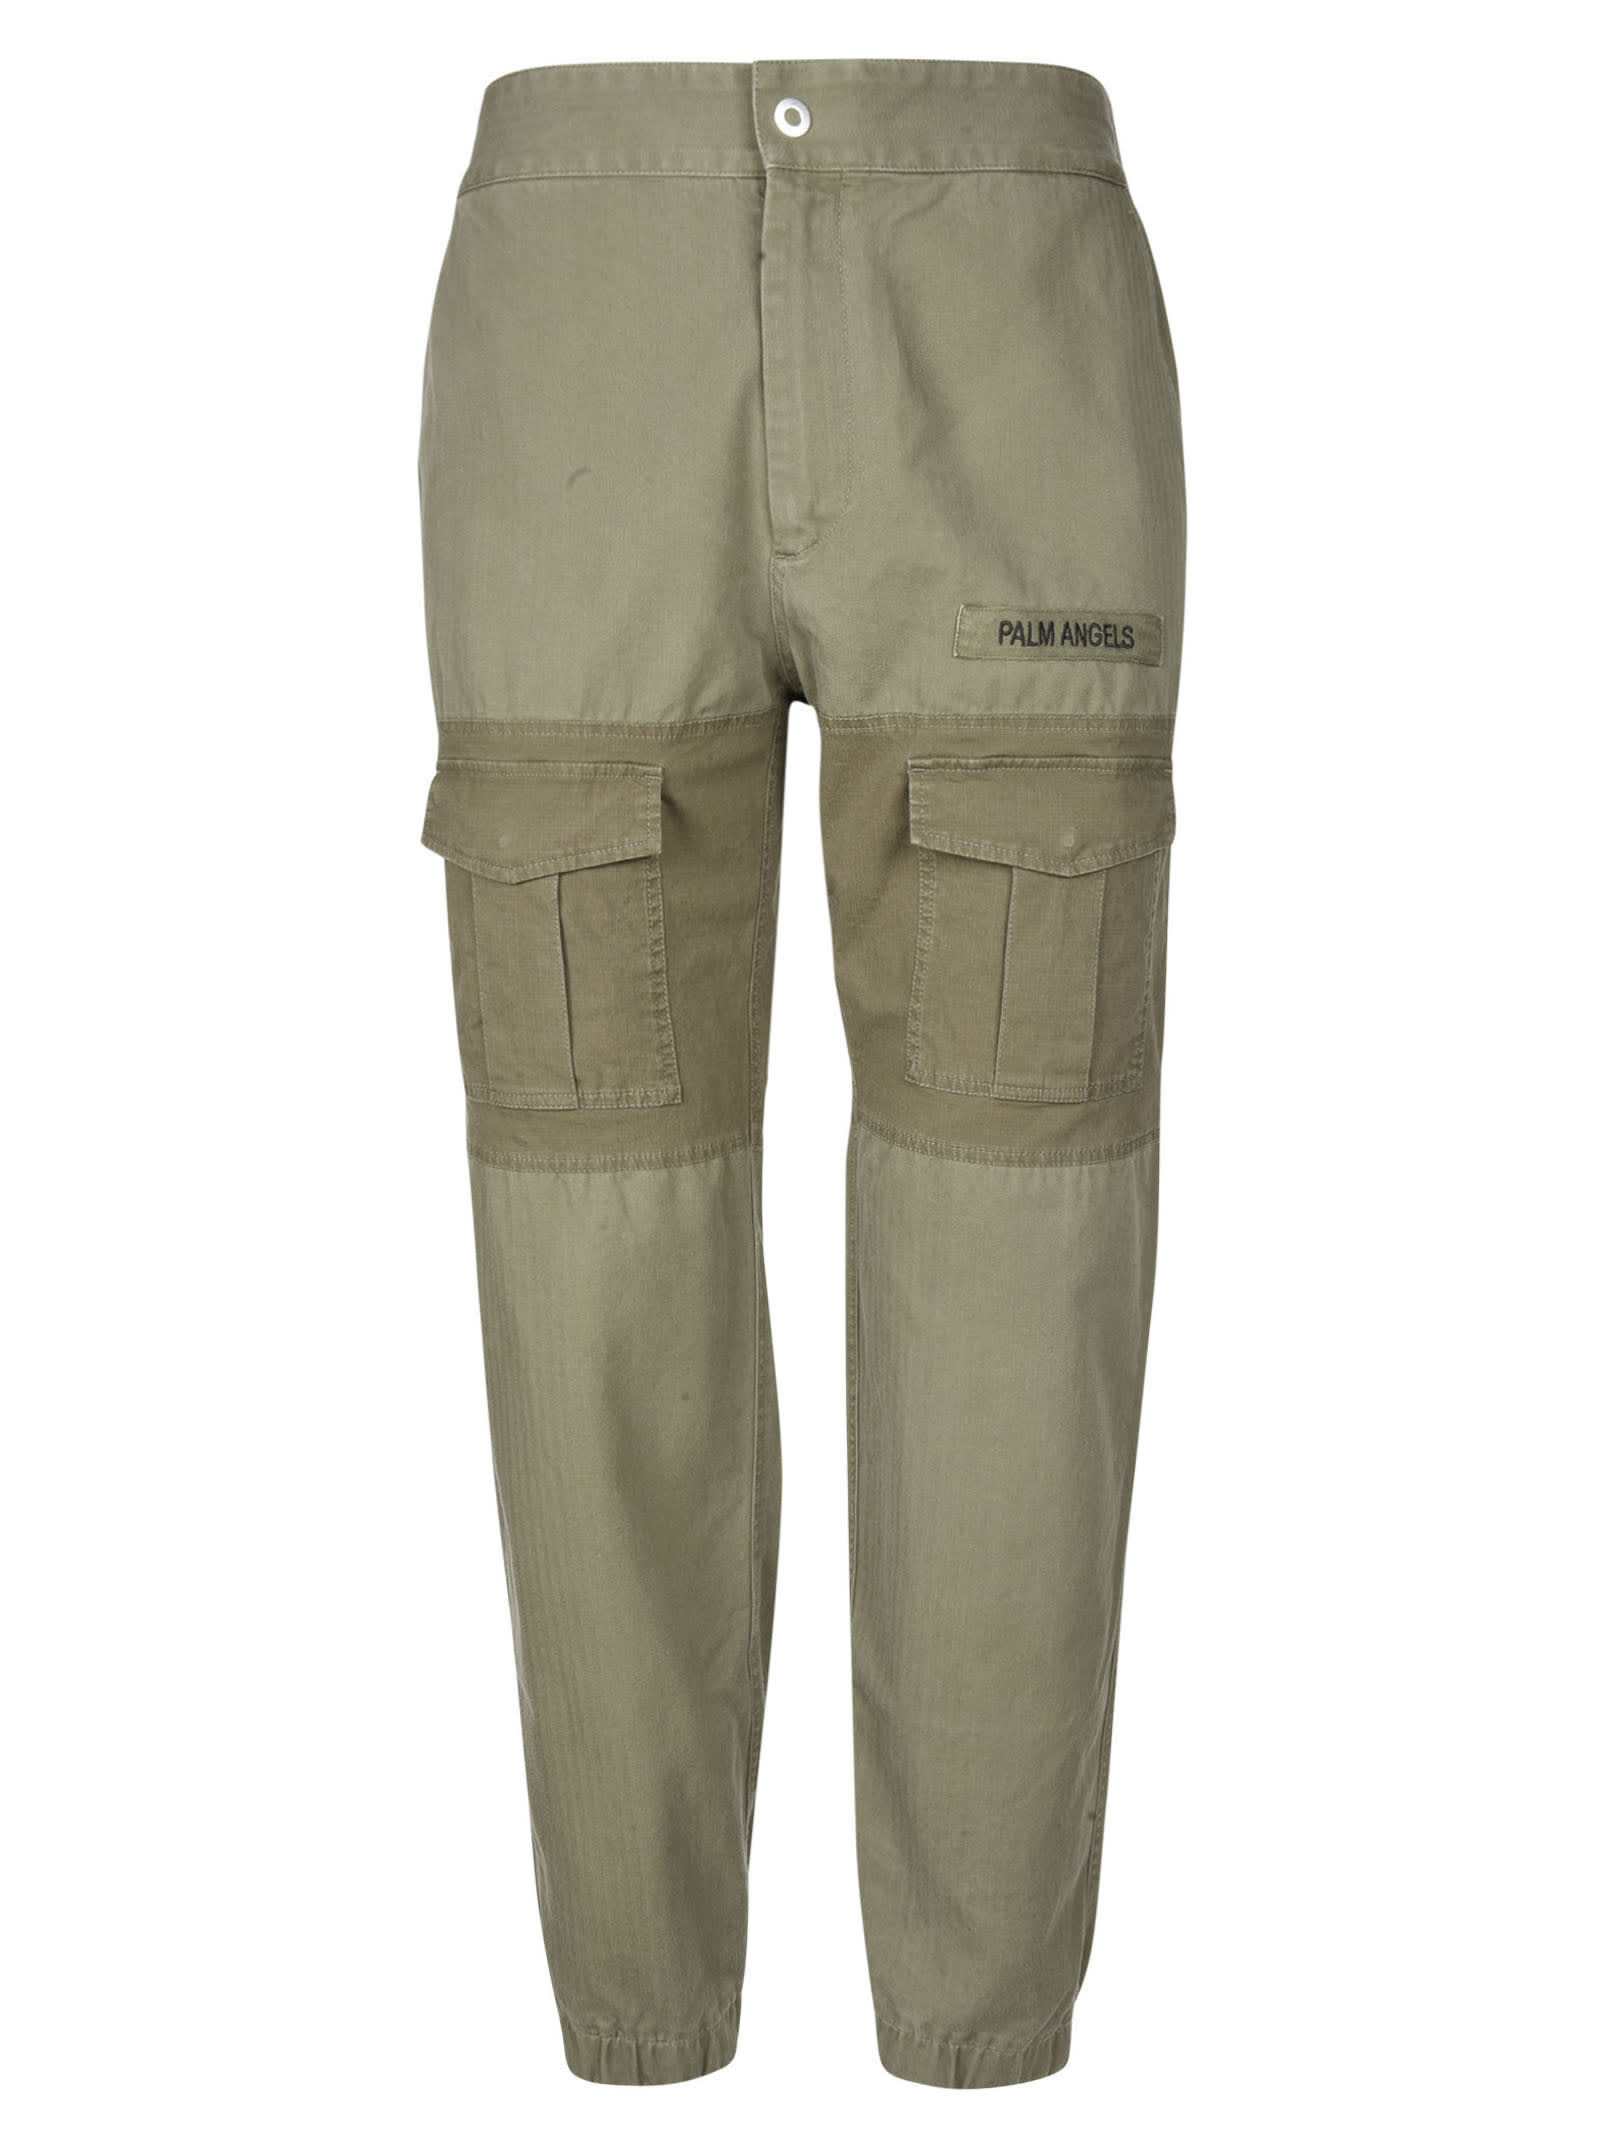 PALM ANGELS MILITARY CARGO PANTS,PMCF010S21 FAB0015610